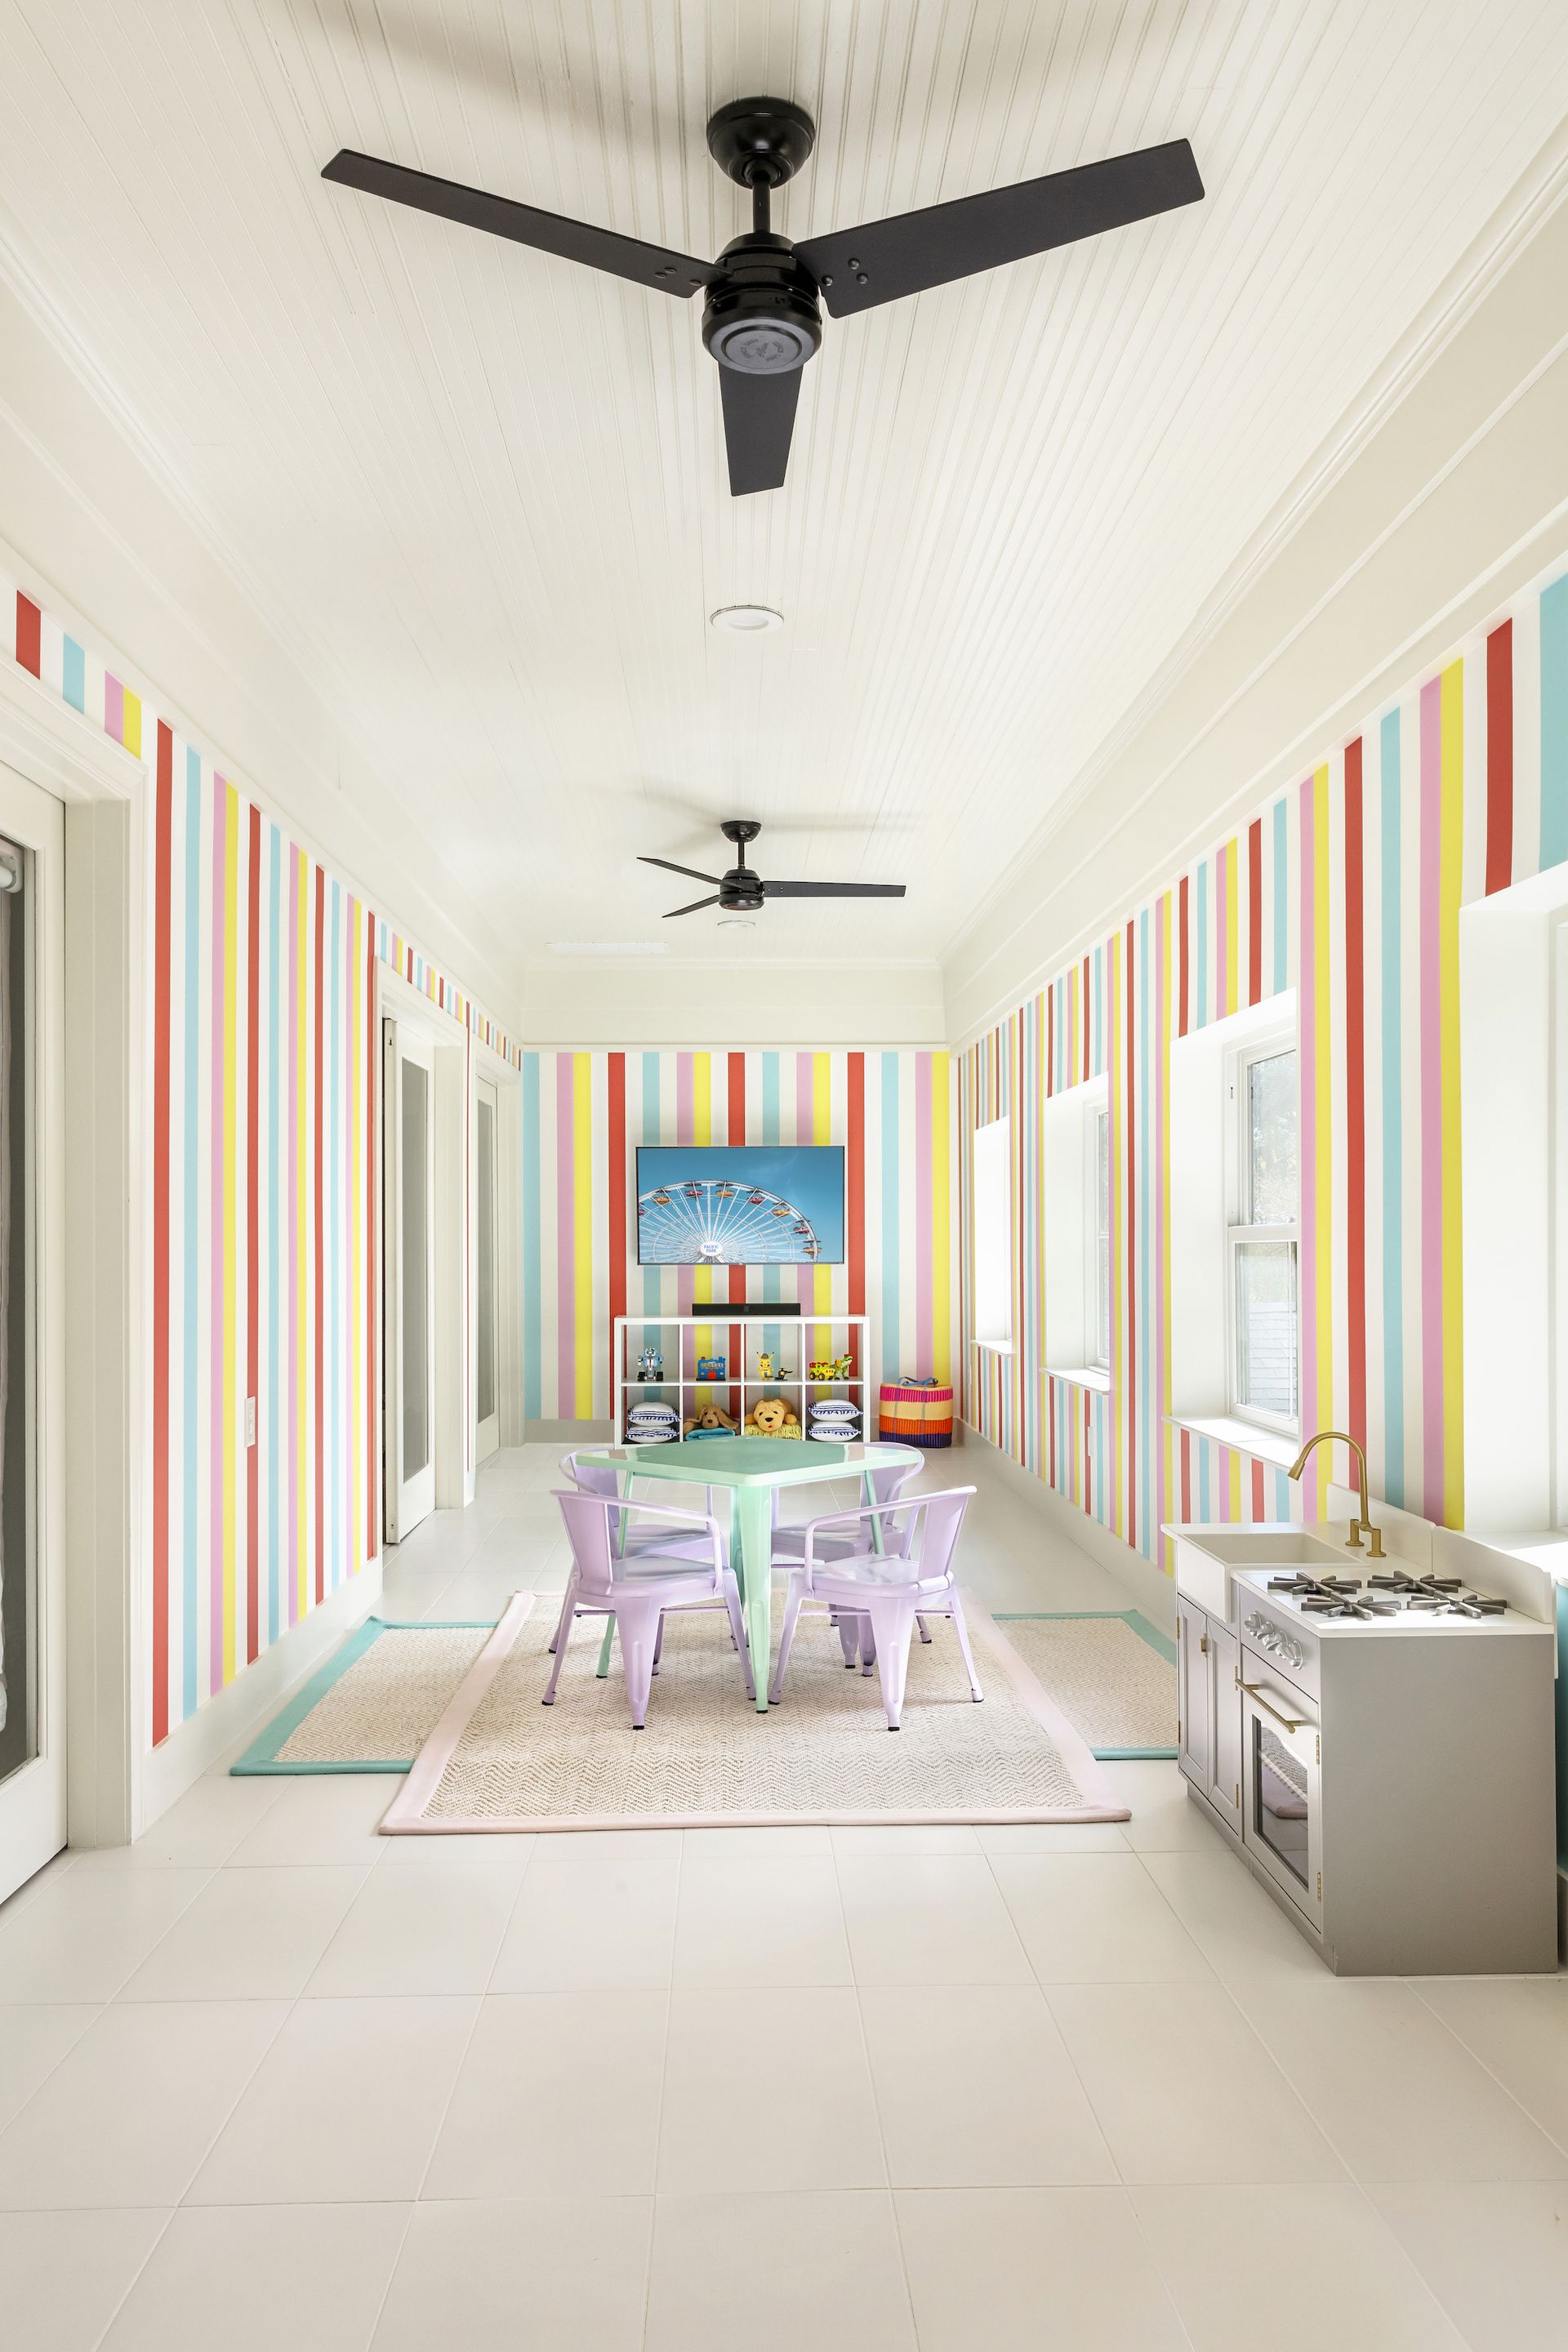 <p>                     Decorating with stripes is a fun but classical way to decorate a playroom, and it can allow you to add candy stripes to keep the space feeling light and bright. In a long, narrow room, it's a good way to alter its proportions, exaggerating the height of the space.                   </p>                                      <p>                     'Our clients really wanted the space to be fun and playful, and the Katie Kime wallpaper was the perfect backdrop,' says Stephanie Lindsey, principal designer at Etch Design Group.                   </p>